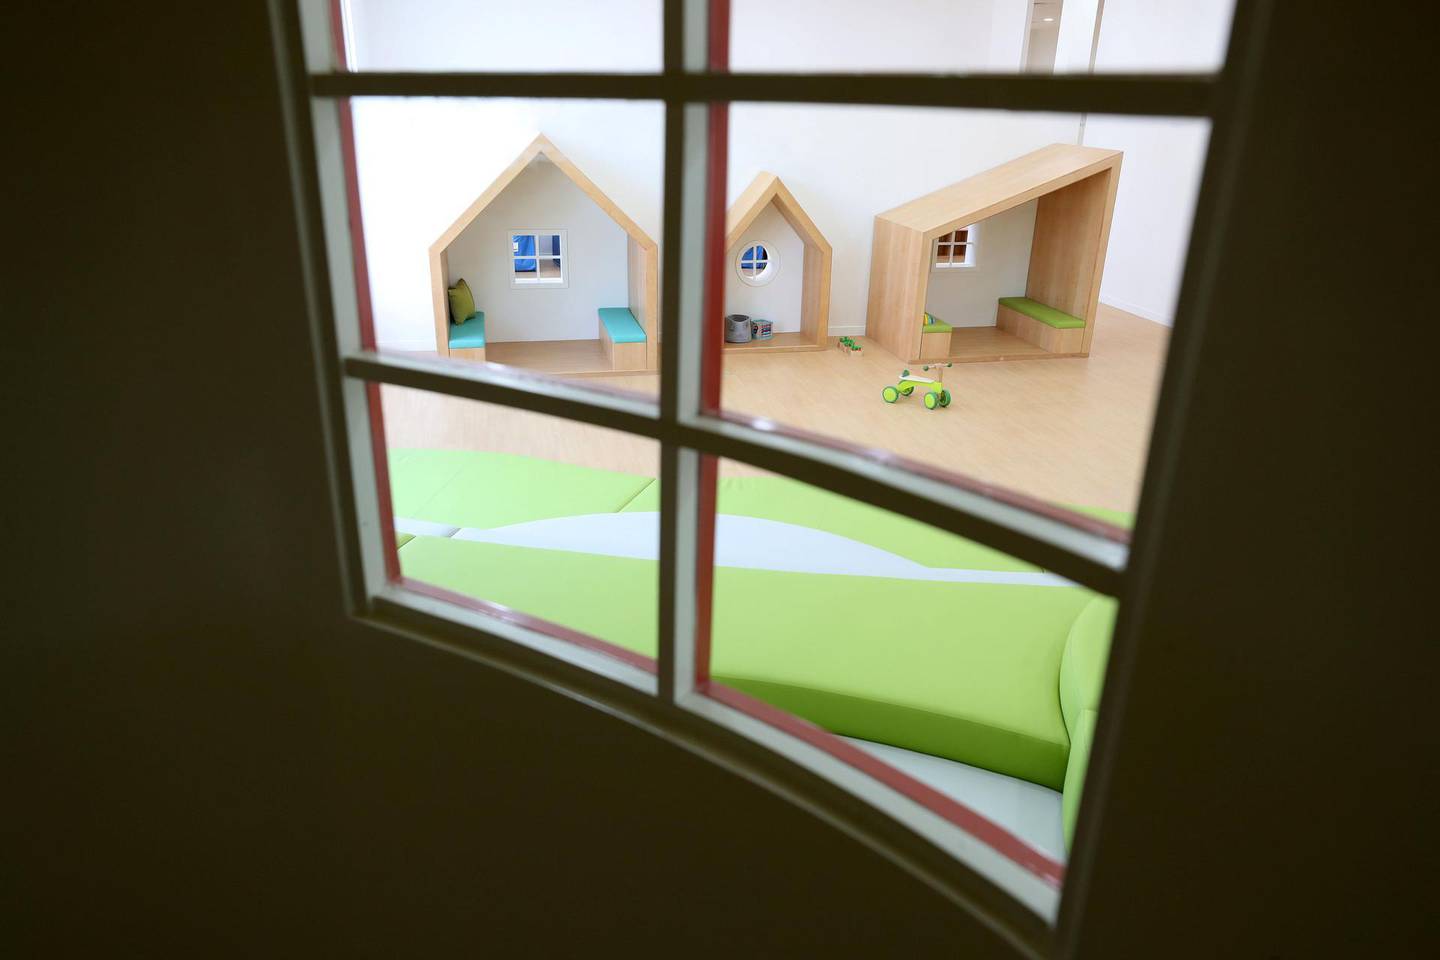 Dubai, United Arab Emirates - Reporter: Janice Rodrigues. Lifestyle. Toddlers Treehouse. First look inside woo-hoo, a new kidsÕ edutainment museum to open in Al Quoz. Tuesday, October 27th, 2020. Dubai. Chris Whiteoak / The National